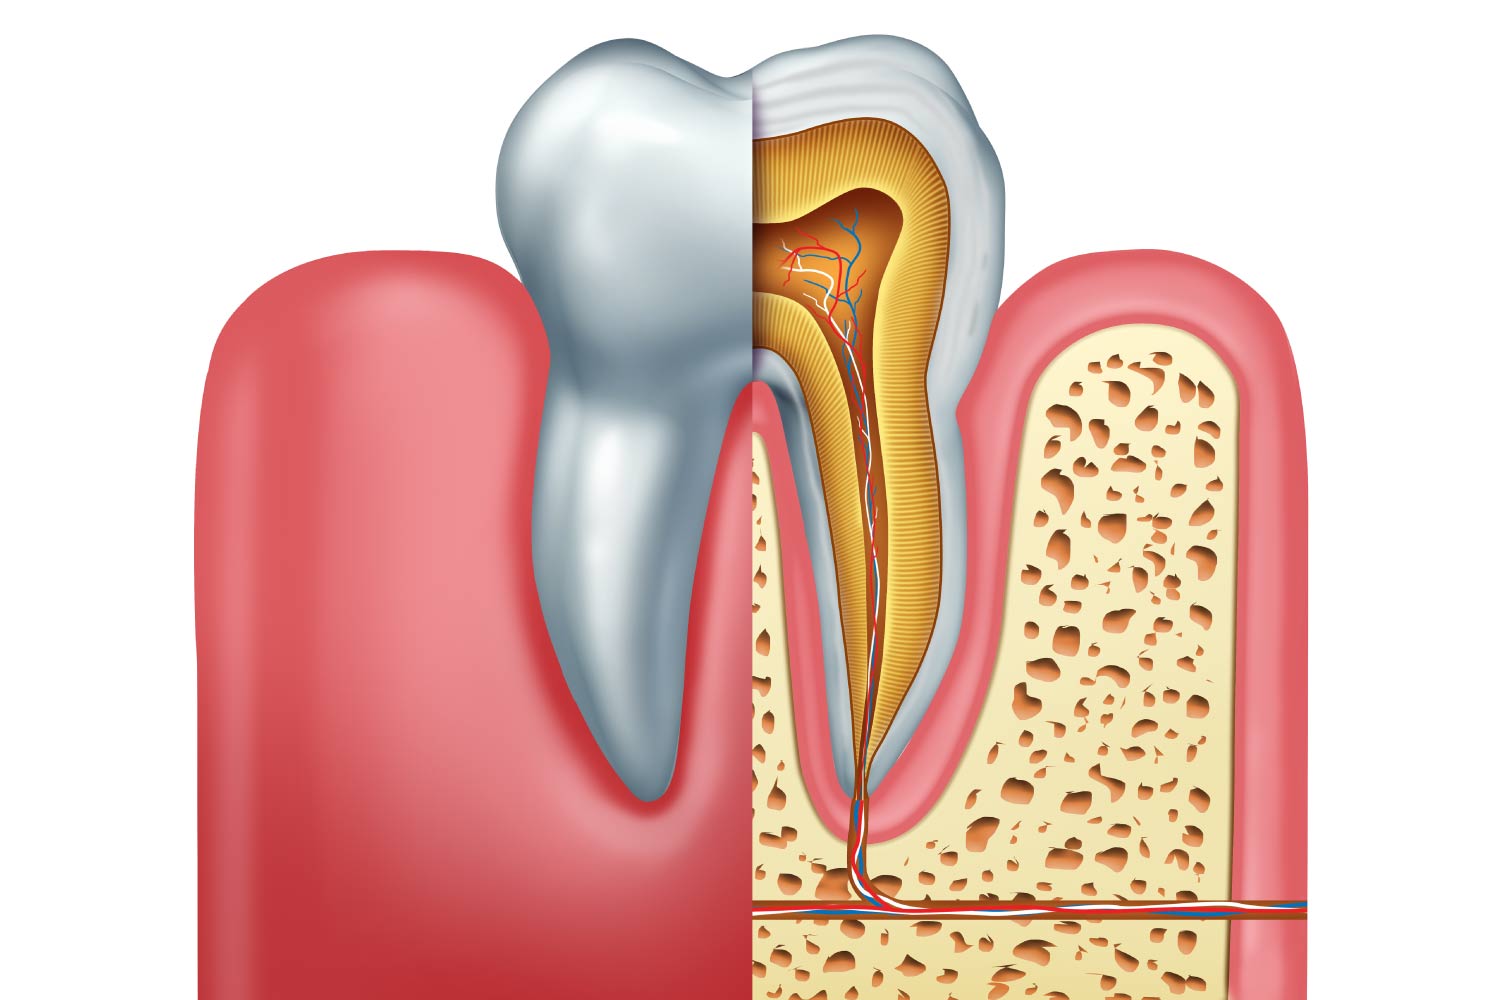 Closeup of a tooth showing its inner anatomy and root canal